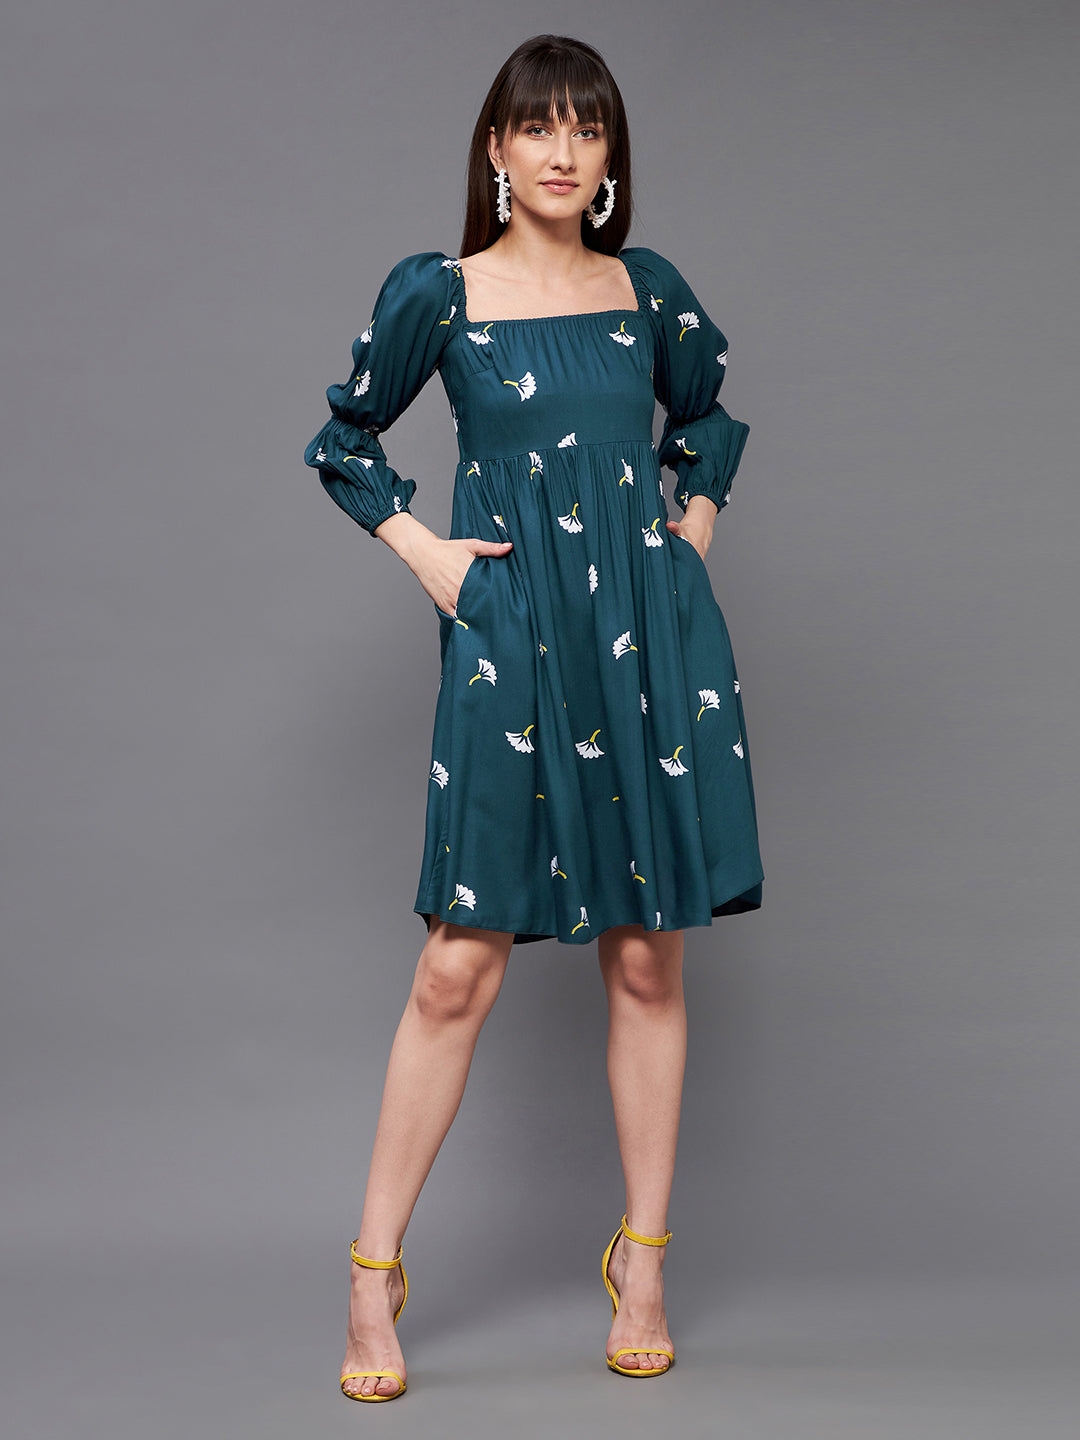 Multicolored-Base-Teal Square  Bishop Sleeve Viscose Rayon Floral Gathered Above Knee Dress